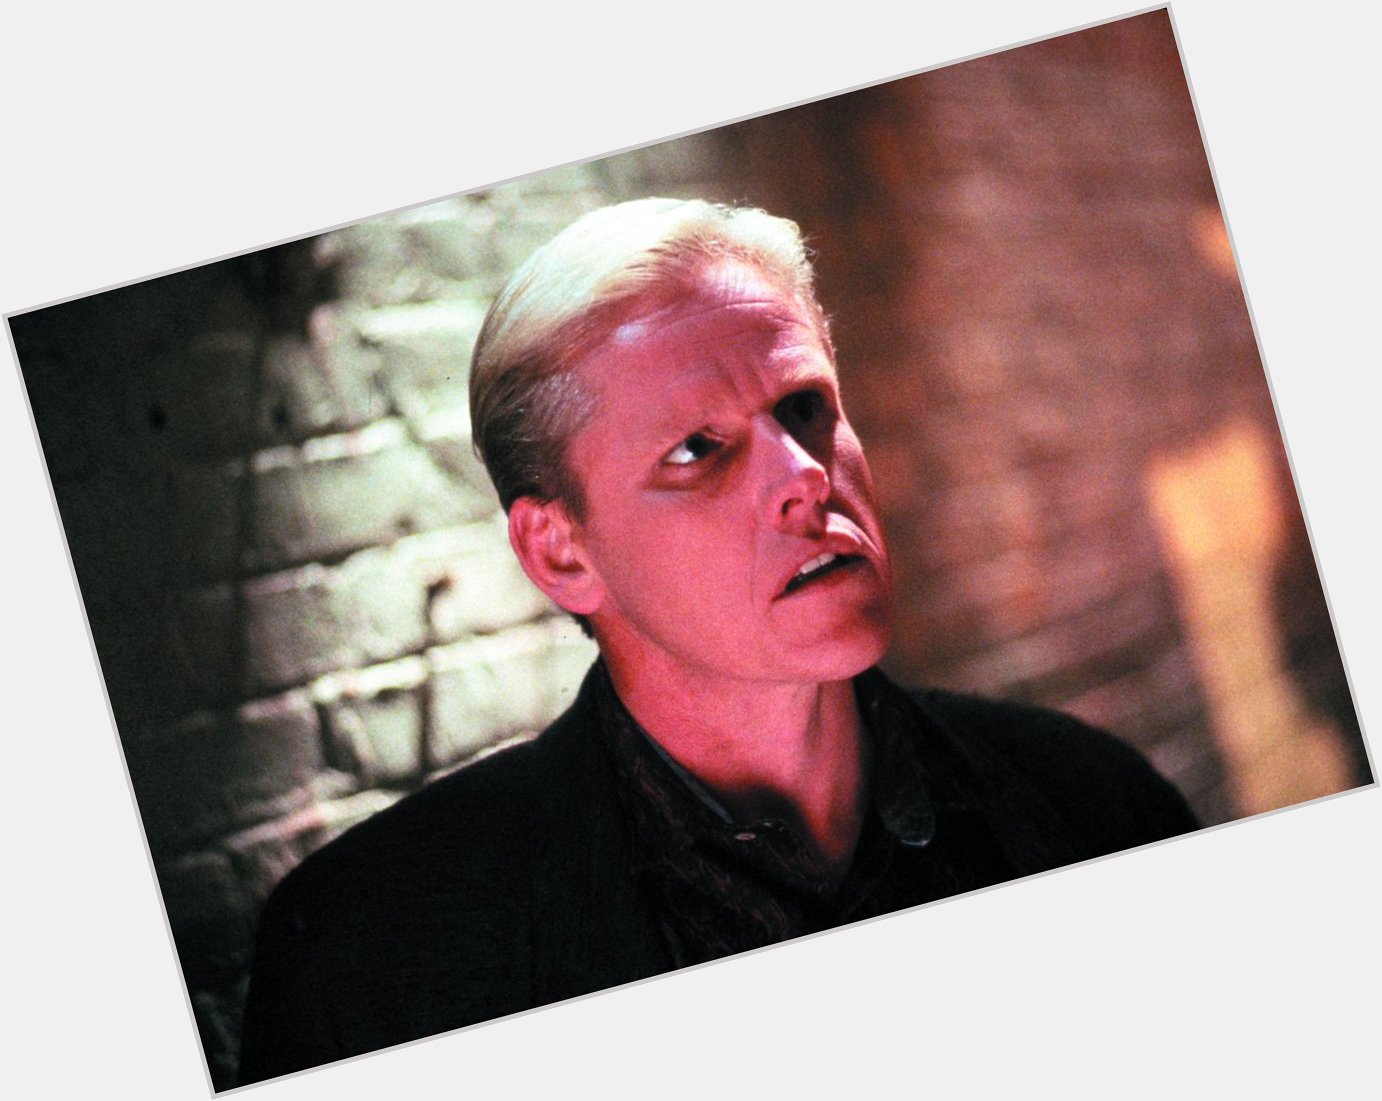 Happy Birthday to Gary Busey!
Name your favorite movie of Gary\s?  